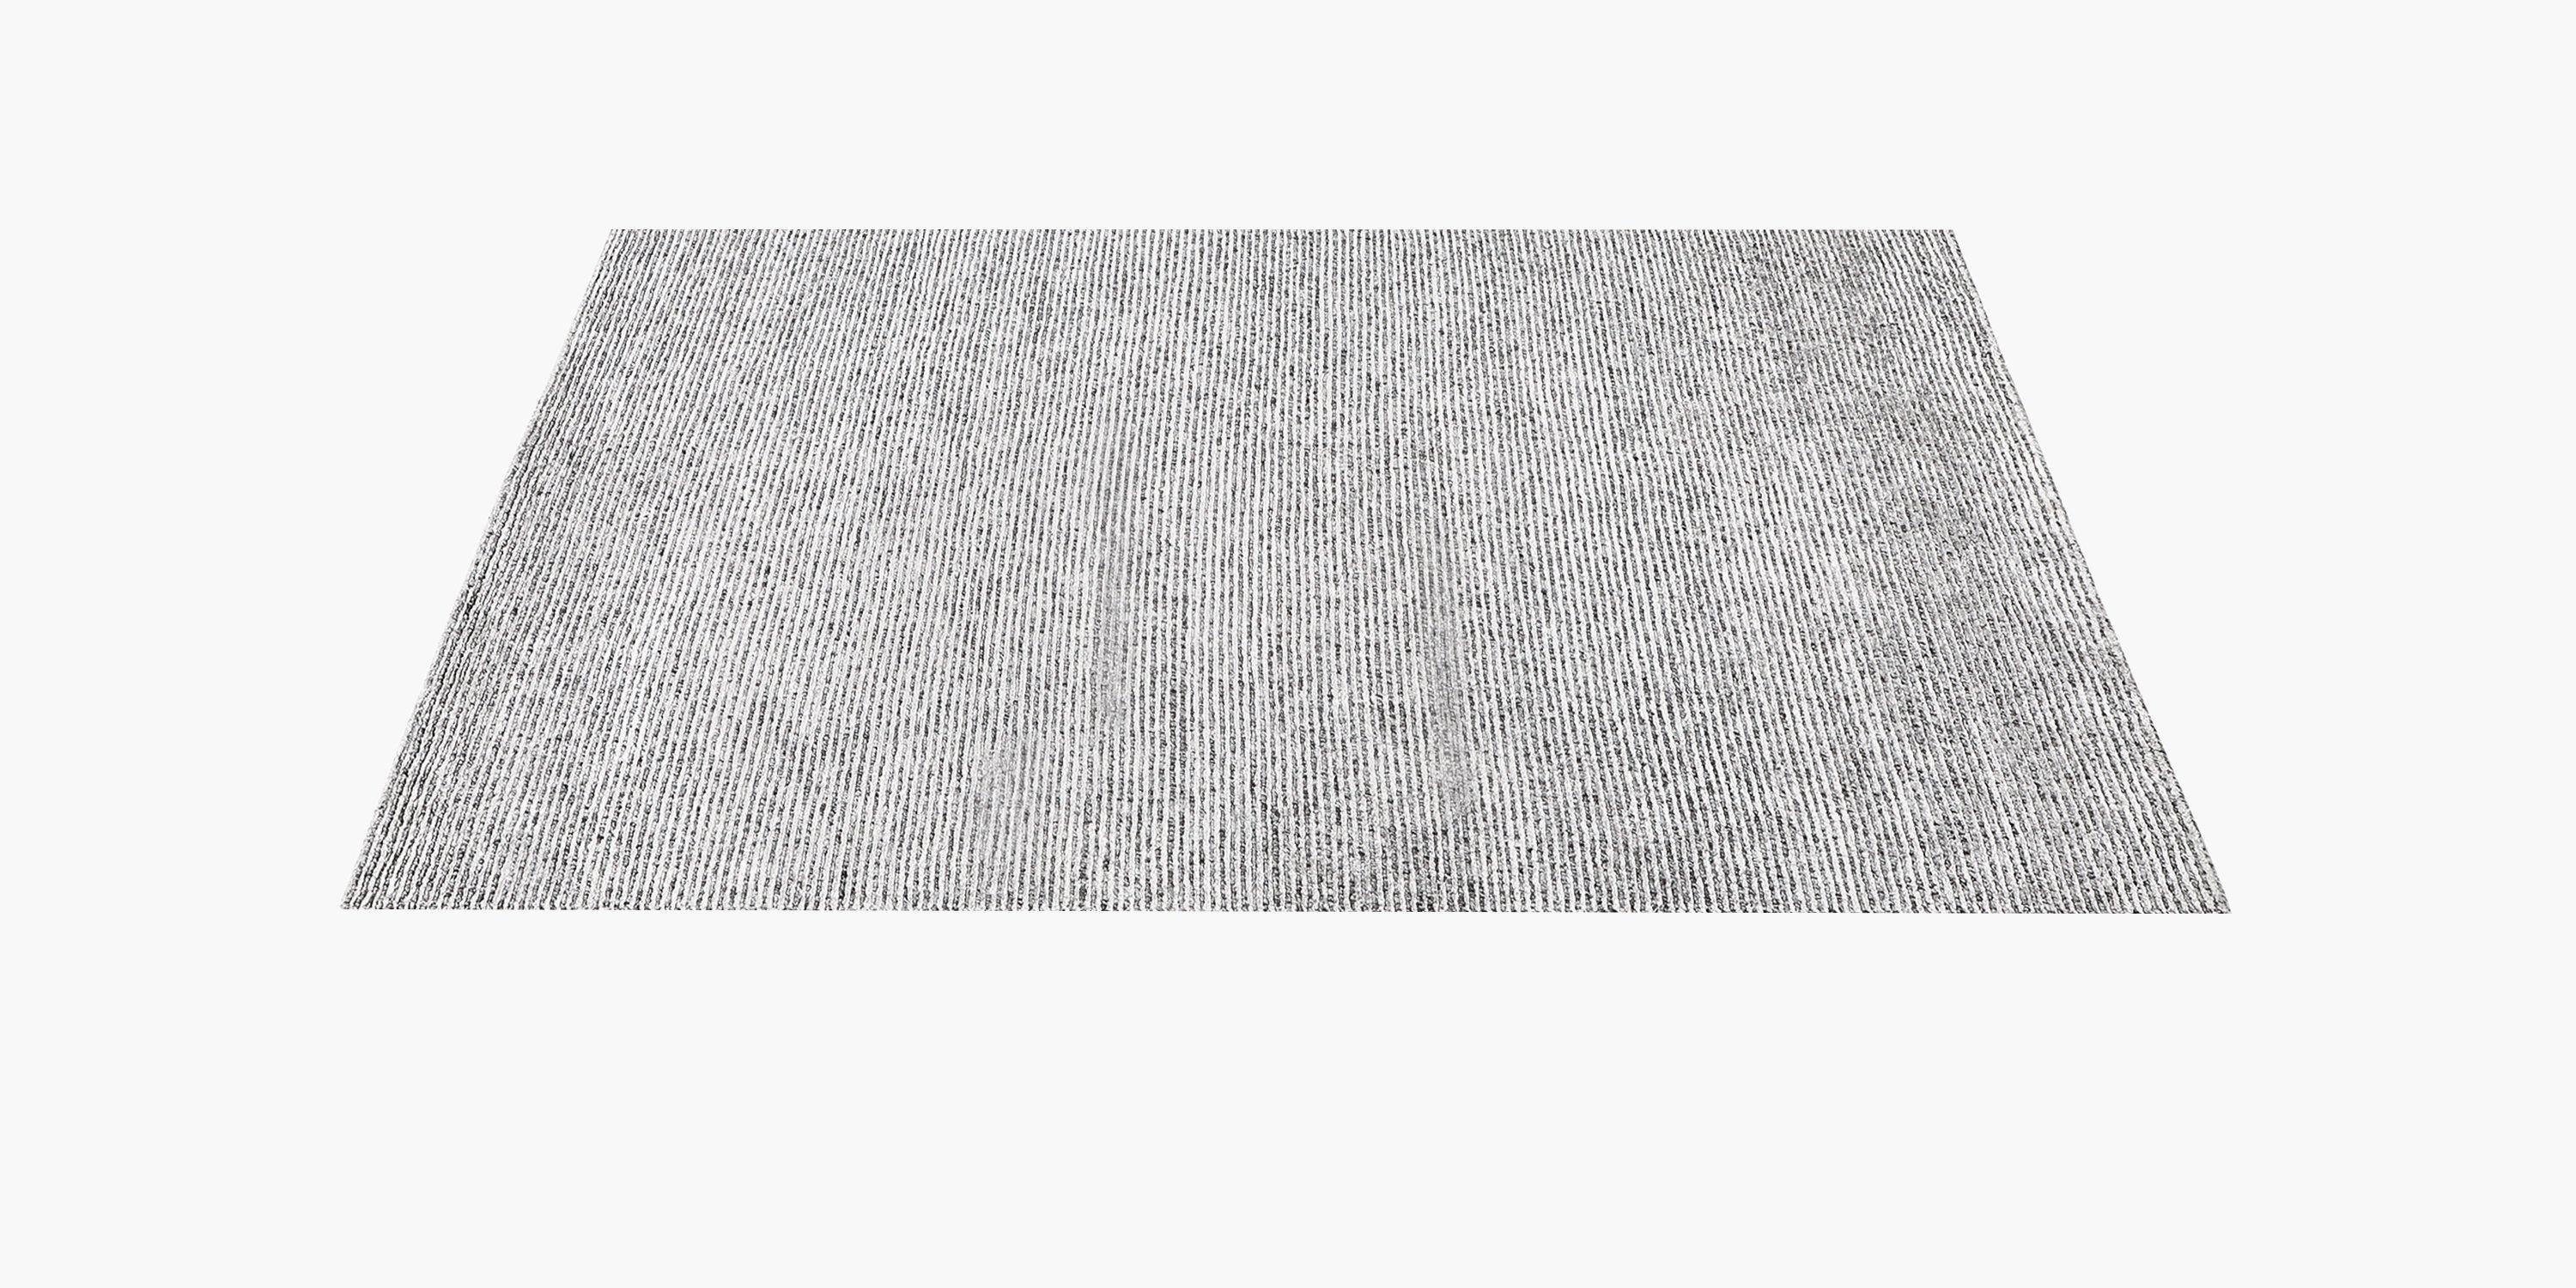 Master artisans hand-weave this luxurious rug from soft blended New Zealand wool, alternating stripes of pile and loops to create its distinctive texture. Marbled yarns create varying tones in the loops, while the ivory pile is cut to an even